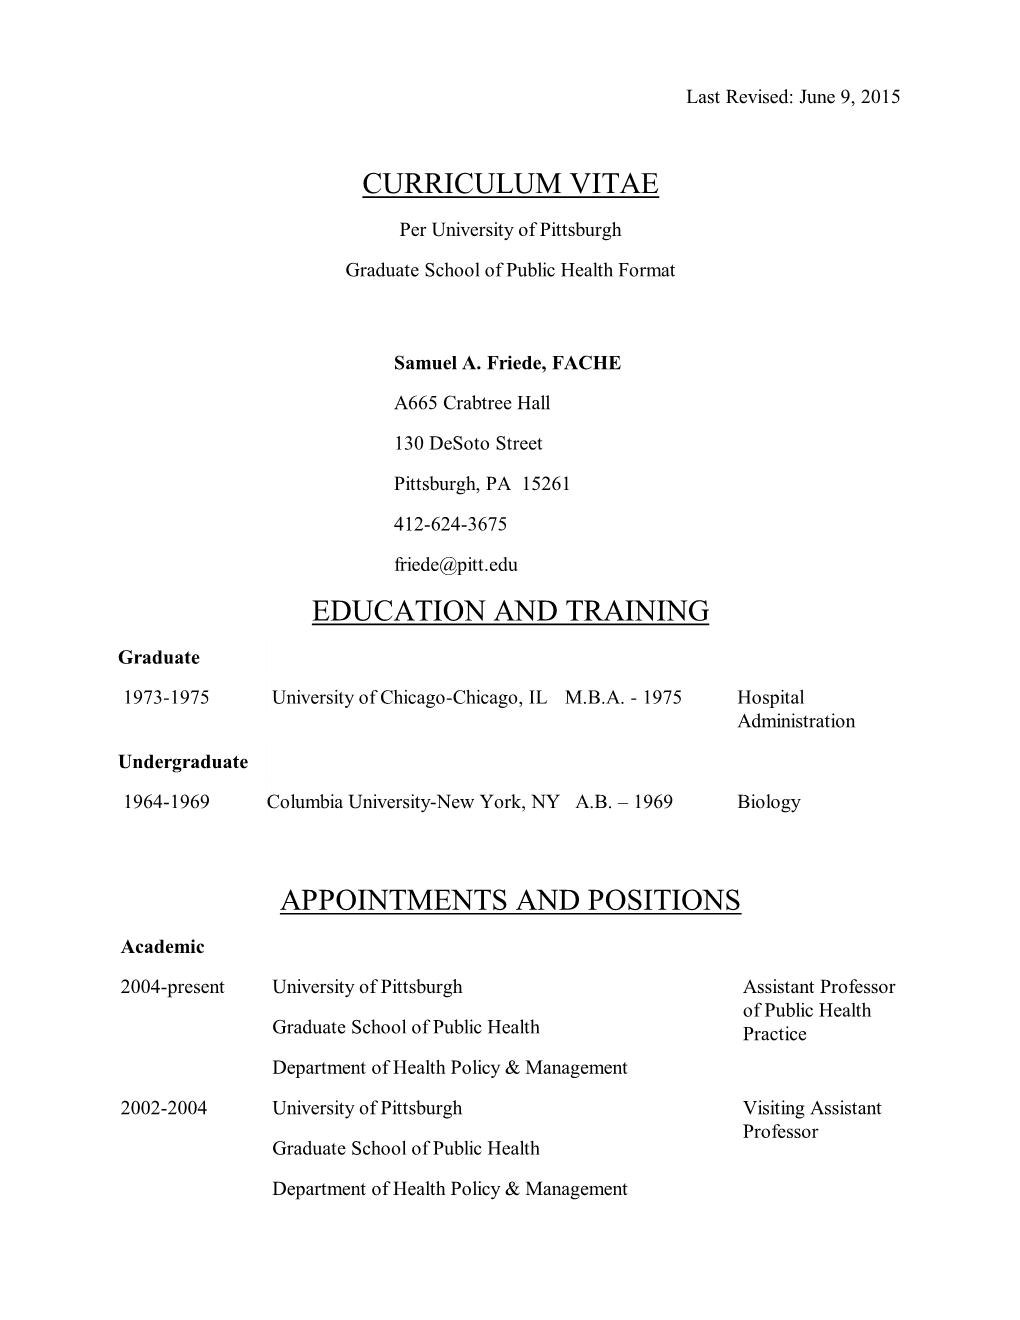 Curriculum Vitae Education and Training Appointments